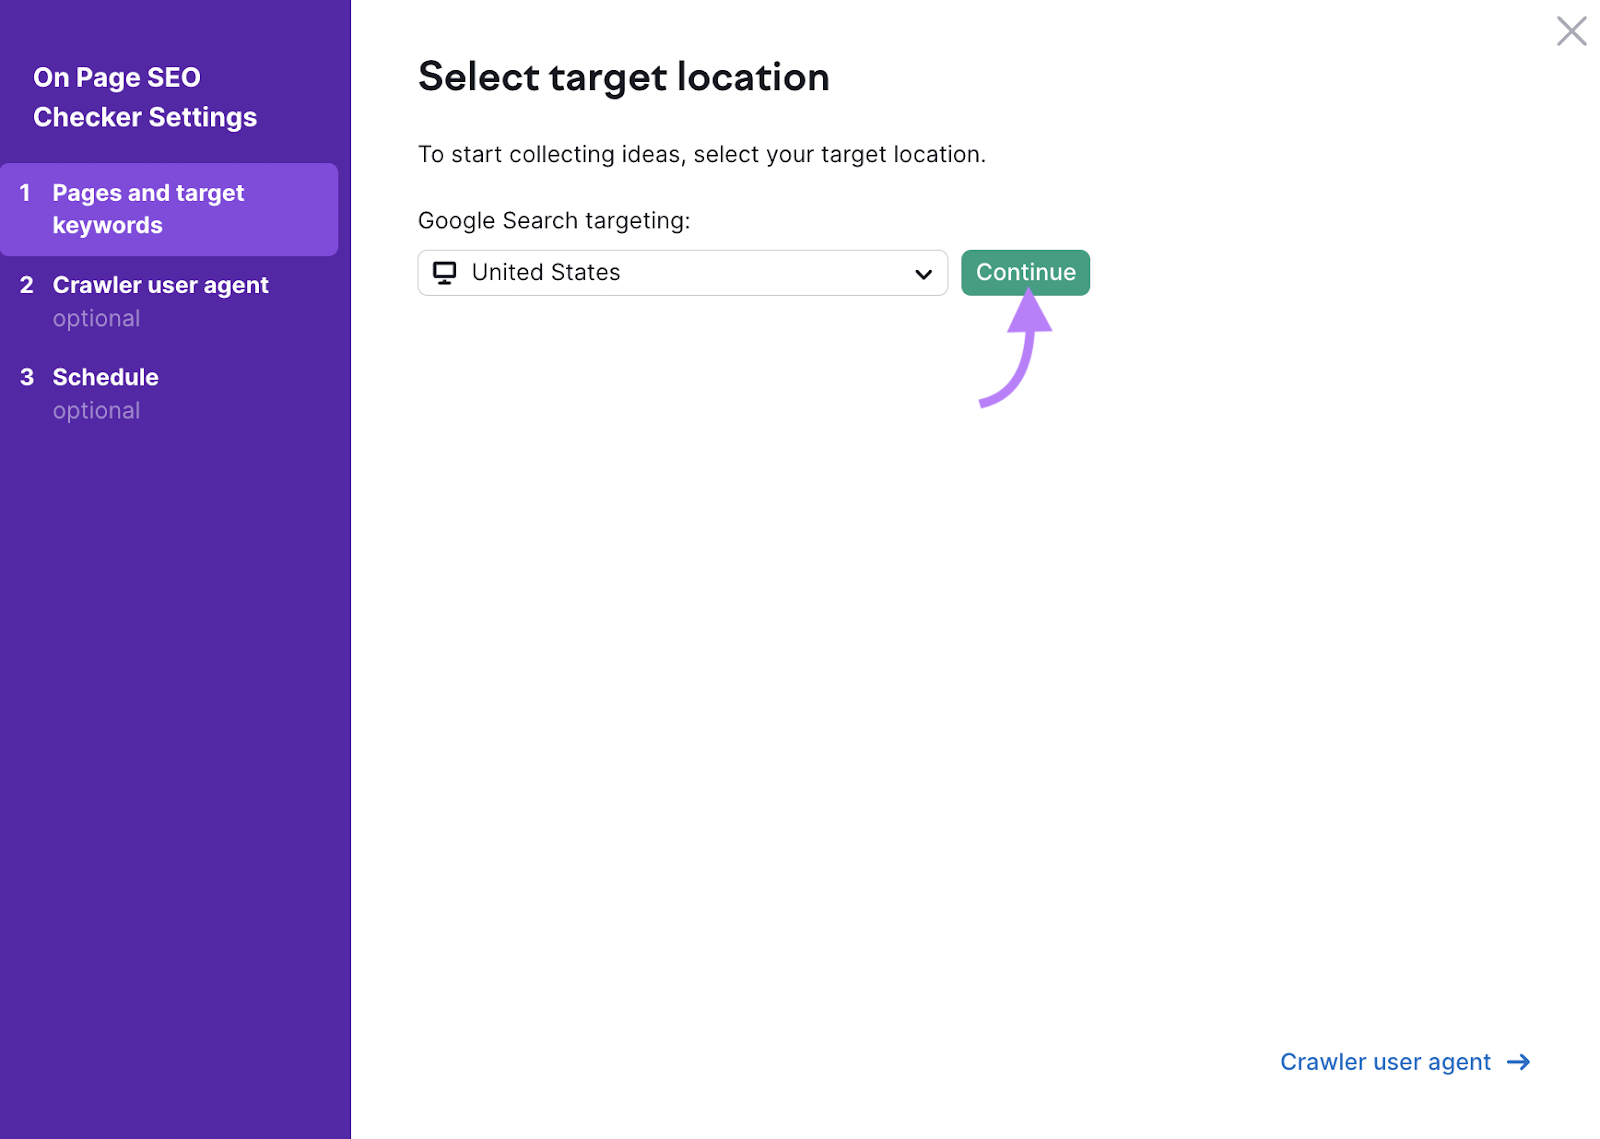 "Select target location" window in On Page SEO Checker settings